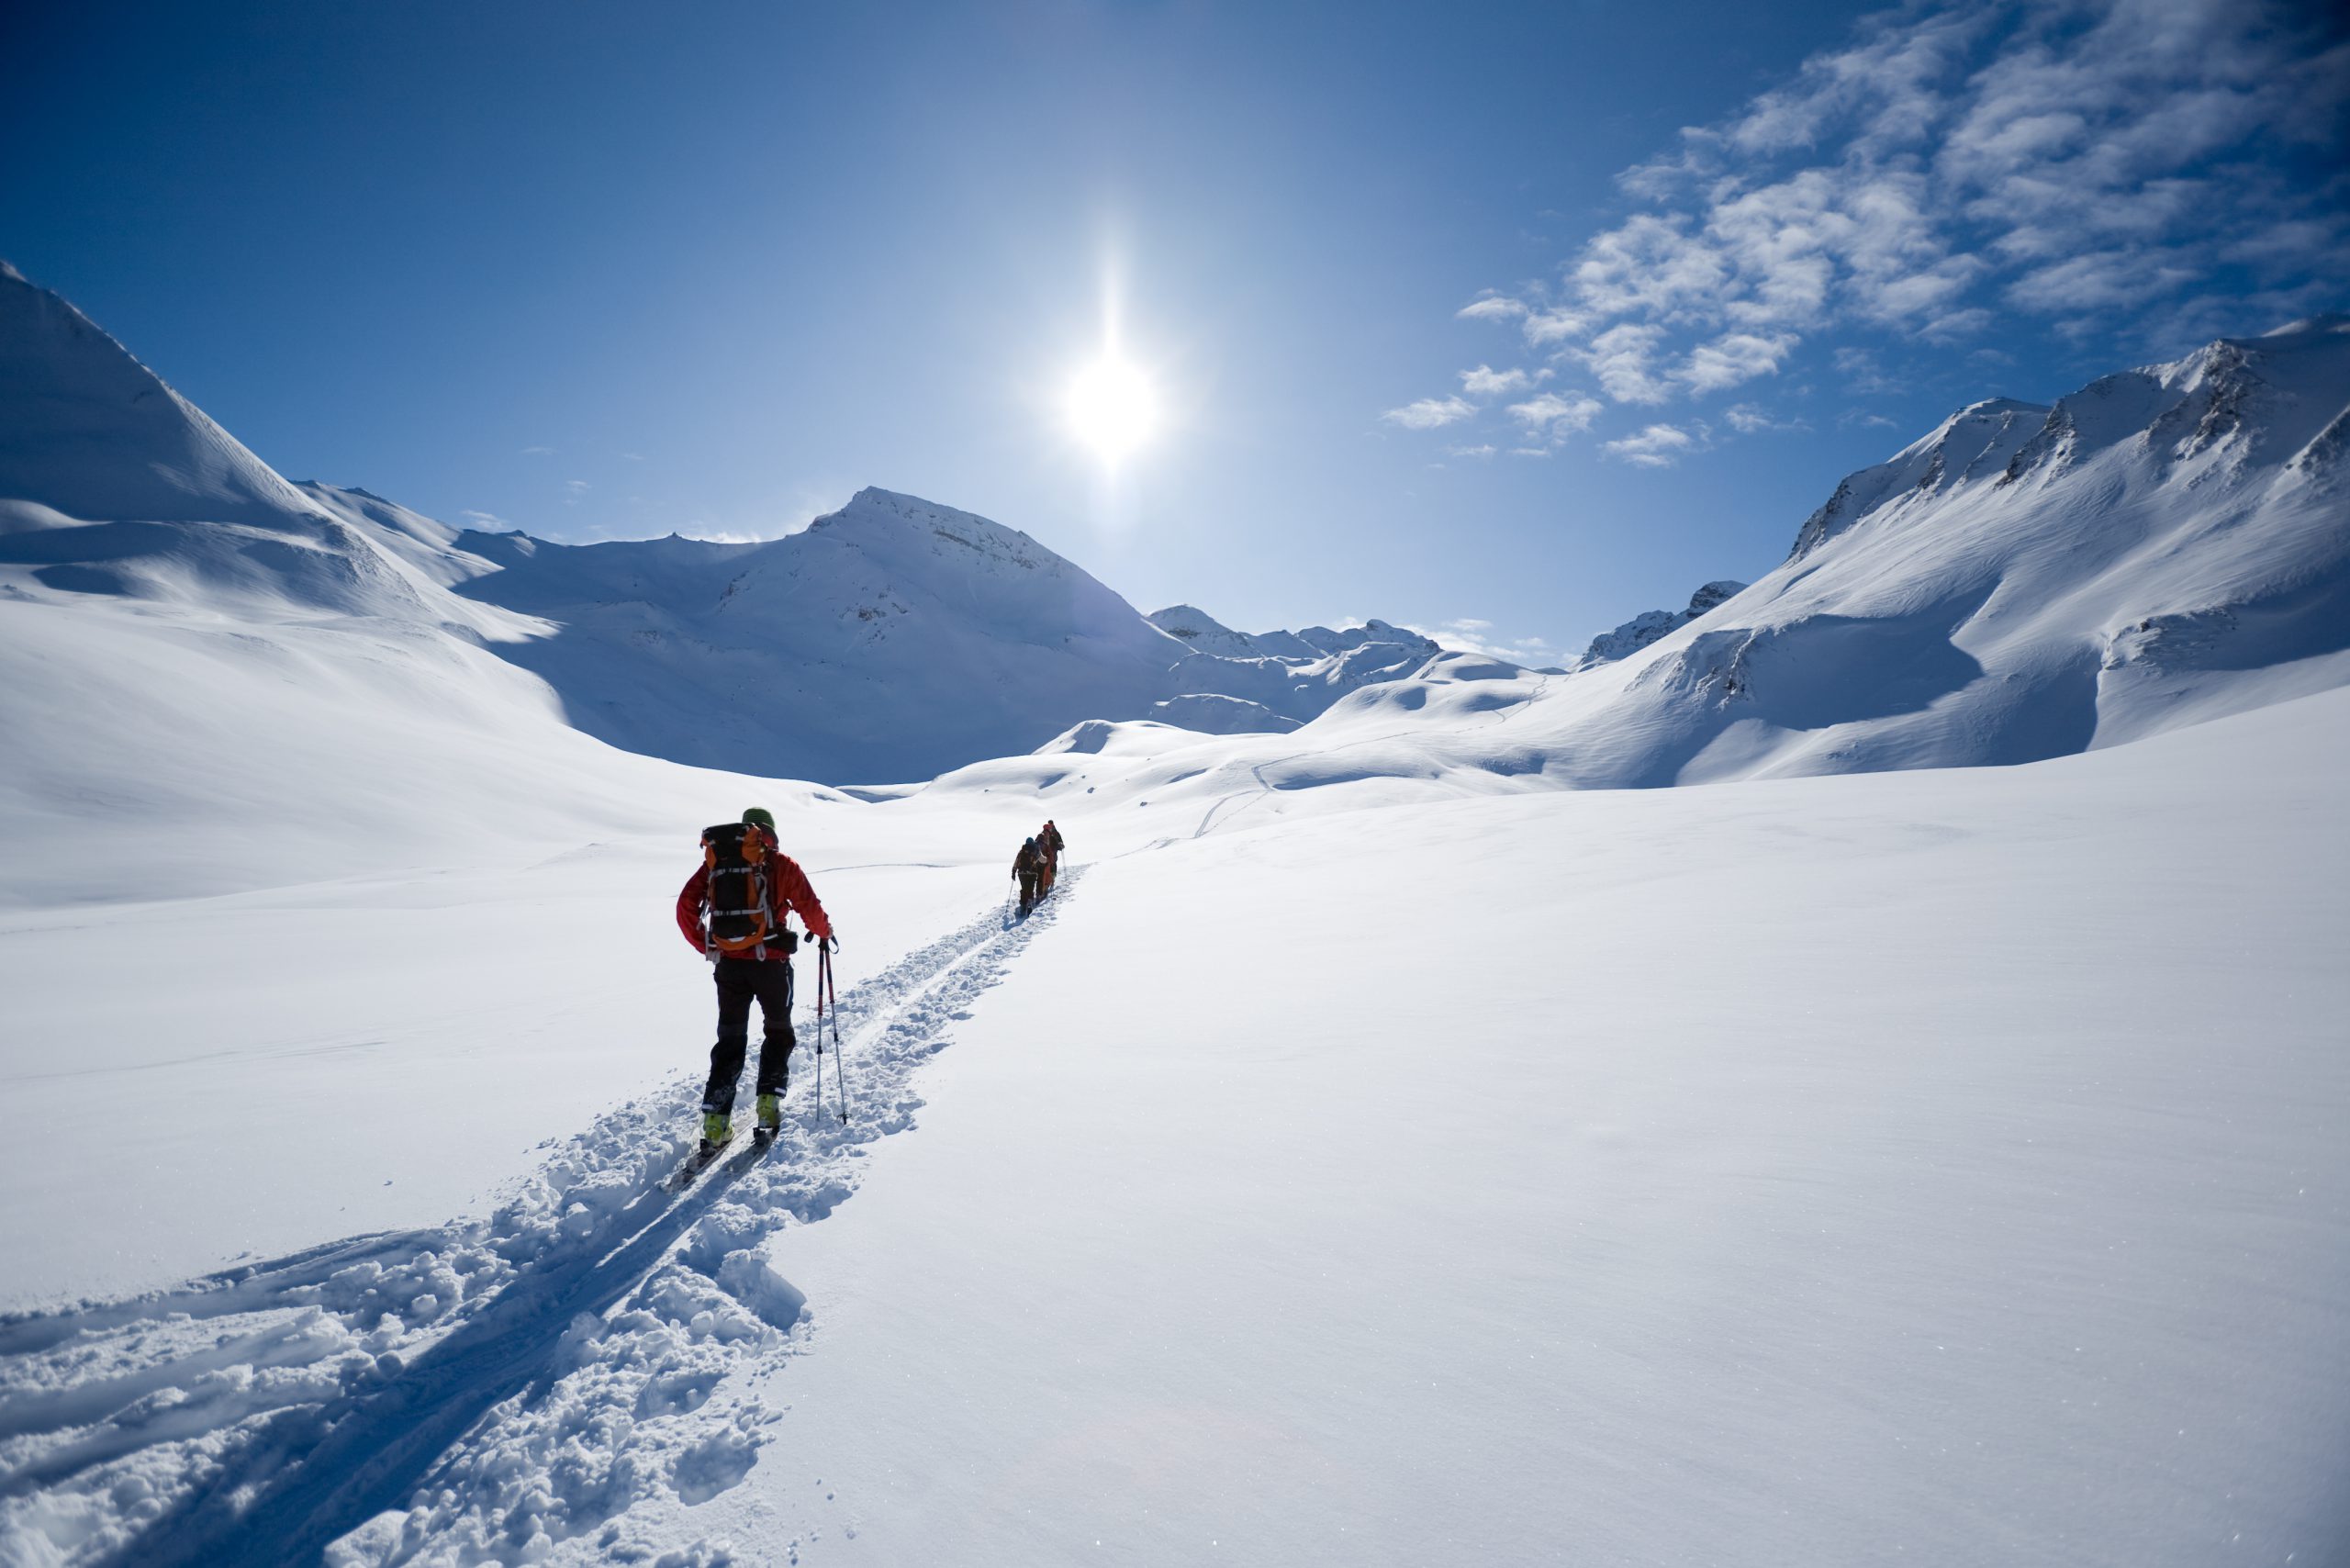 ski touring, ski mountaineering people on its way in the Austrian/Swiss Alps